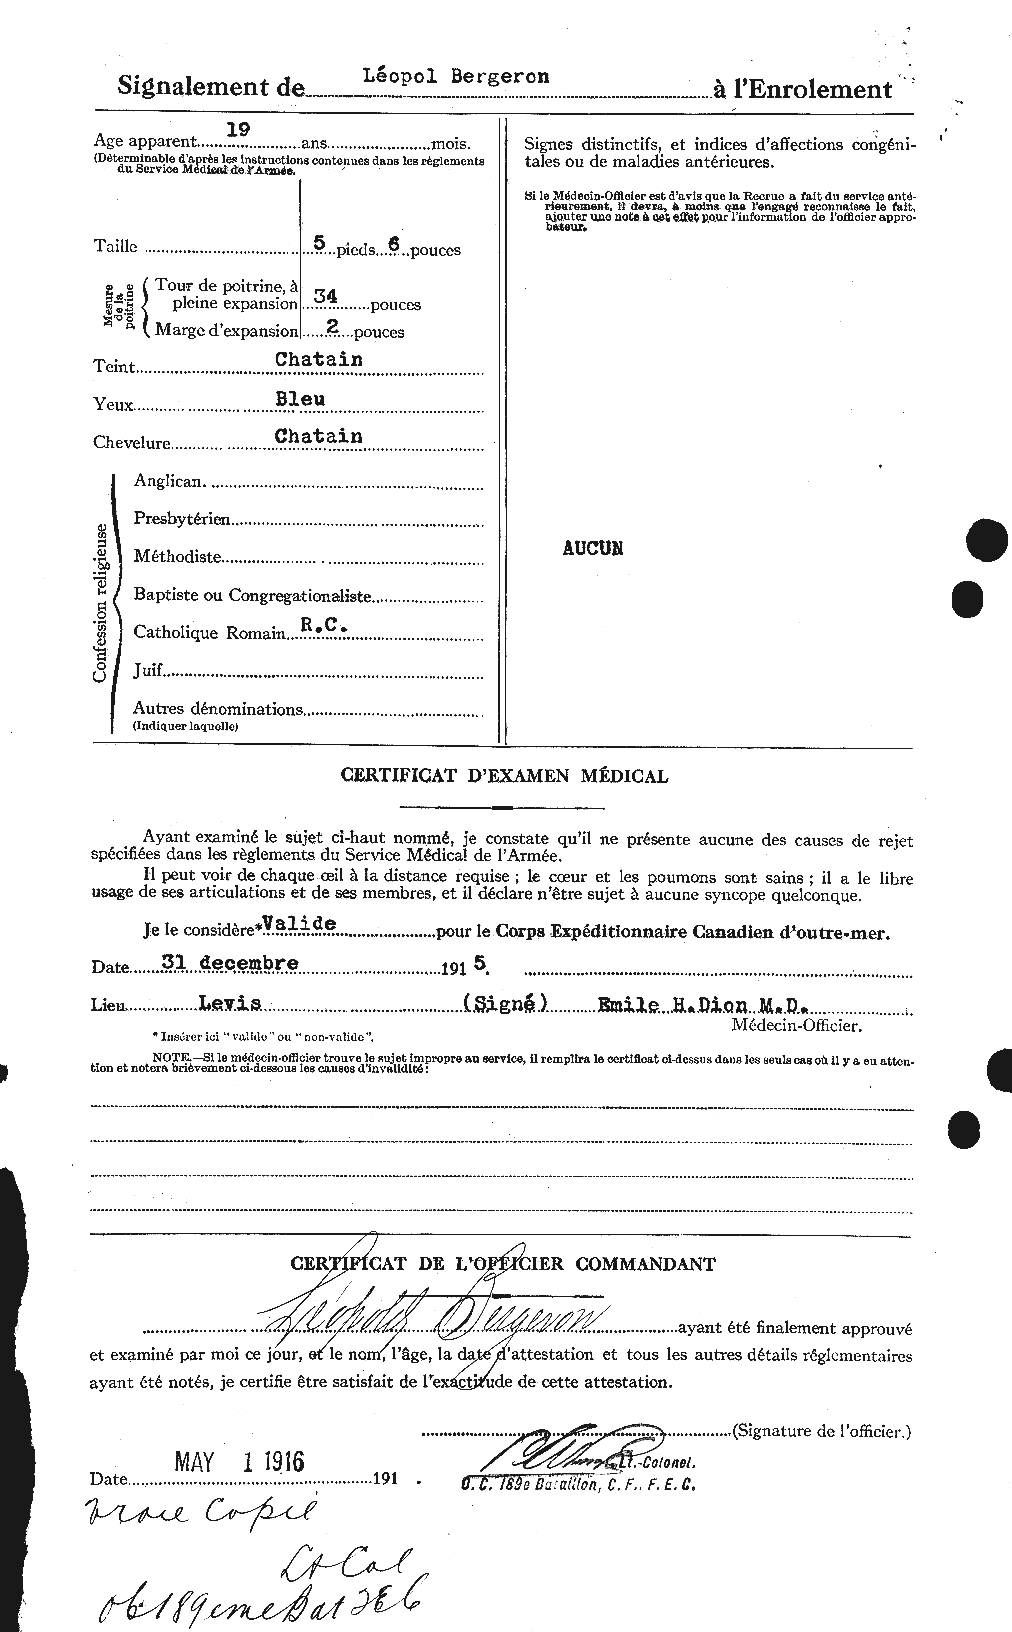 Personnel Records of the First World War - CEF 232964b